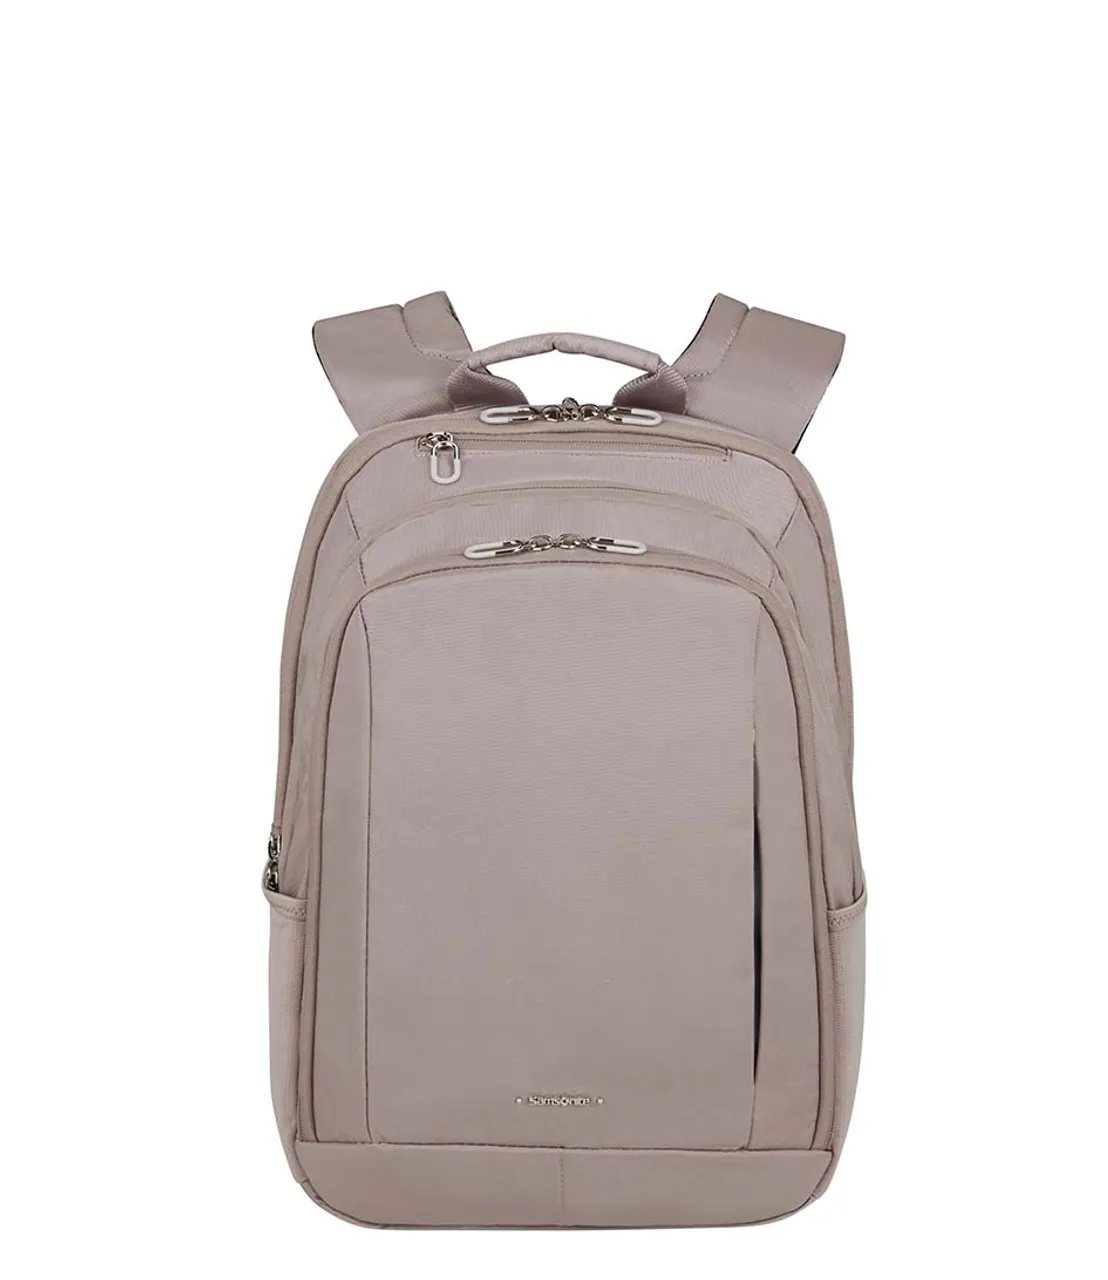 Guardit Classy Backpack 14.1 Inch